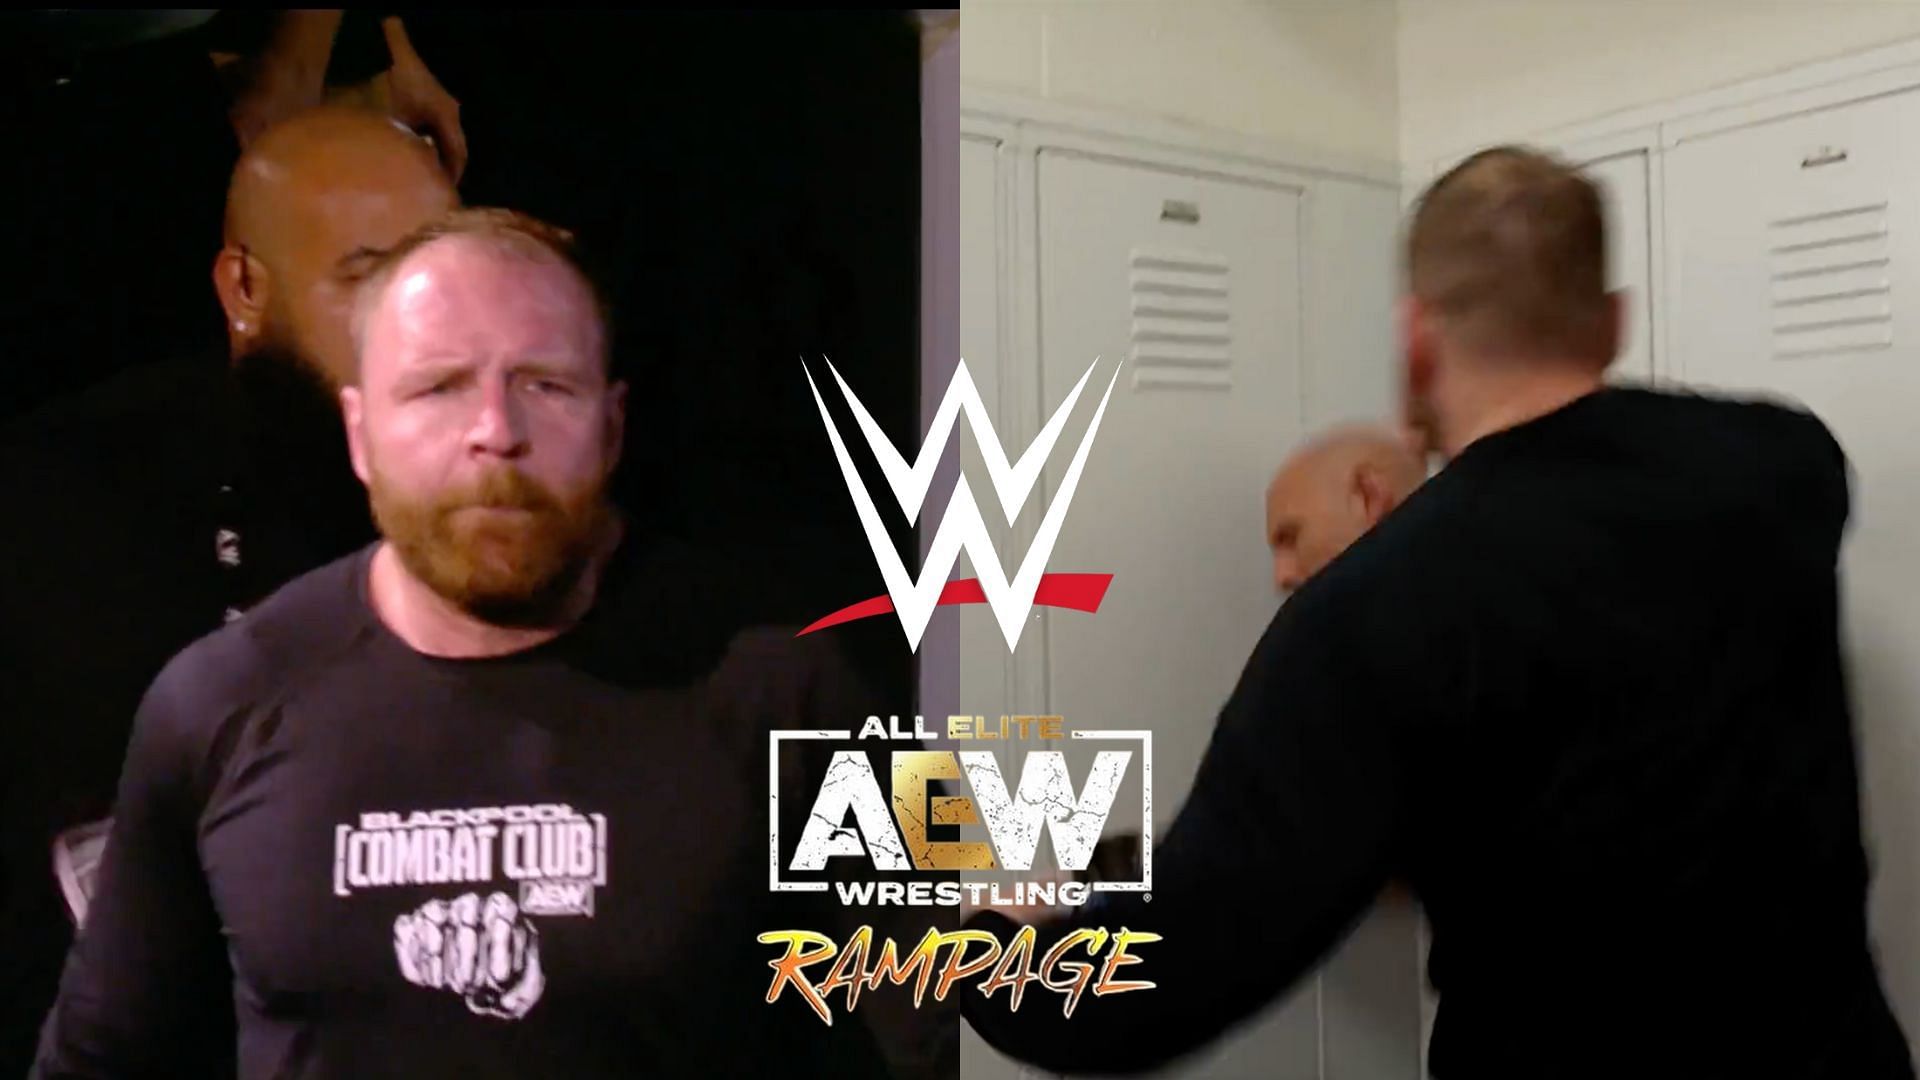 It was another great edition of AEW Rampage